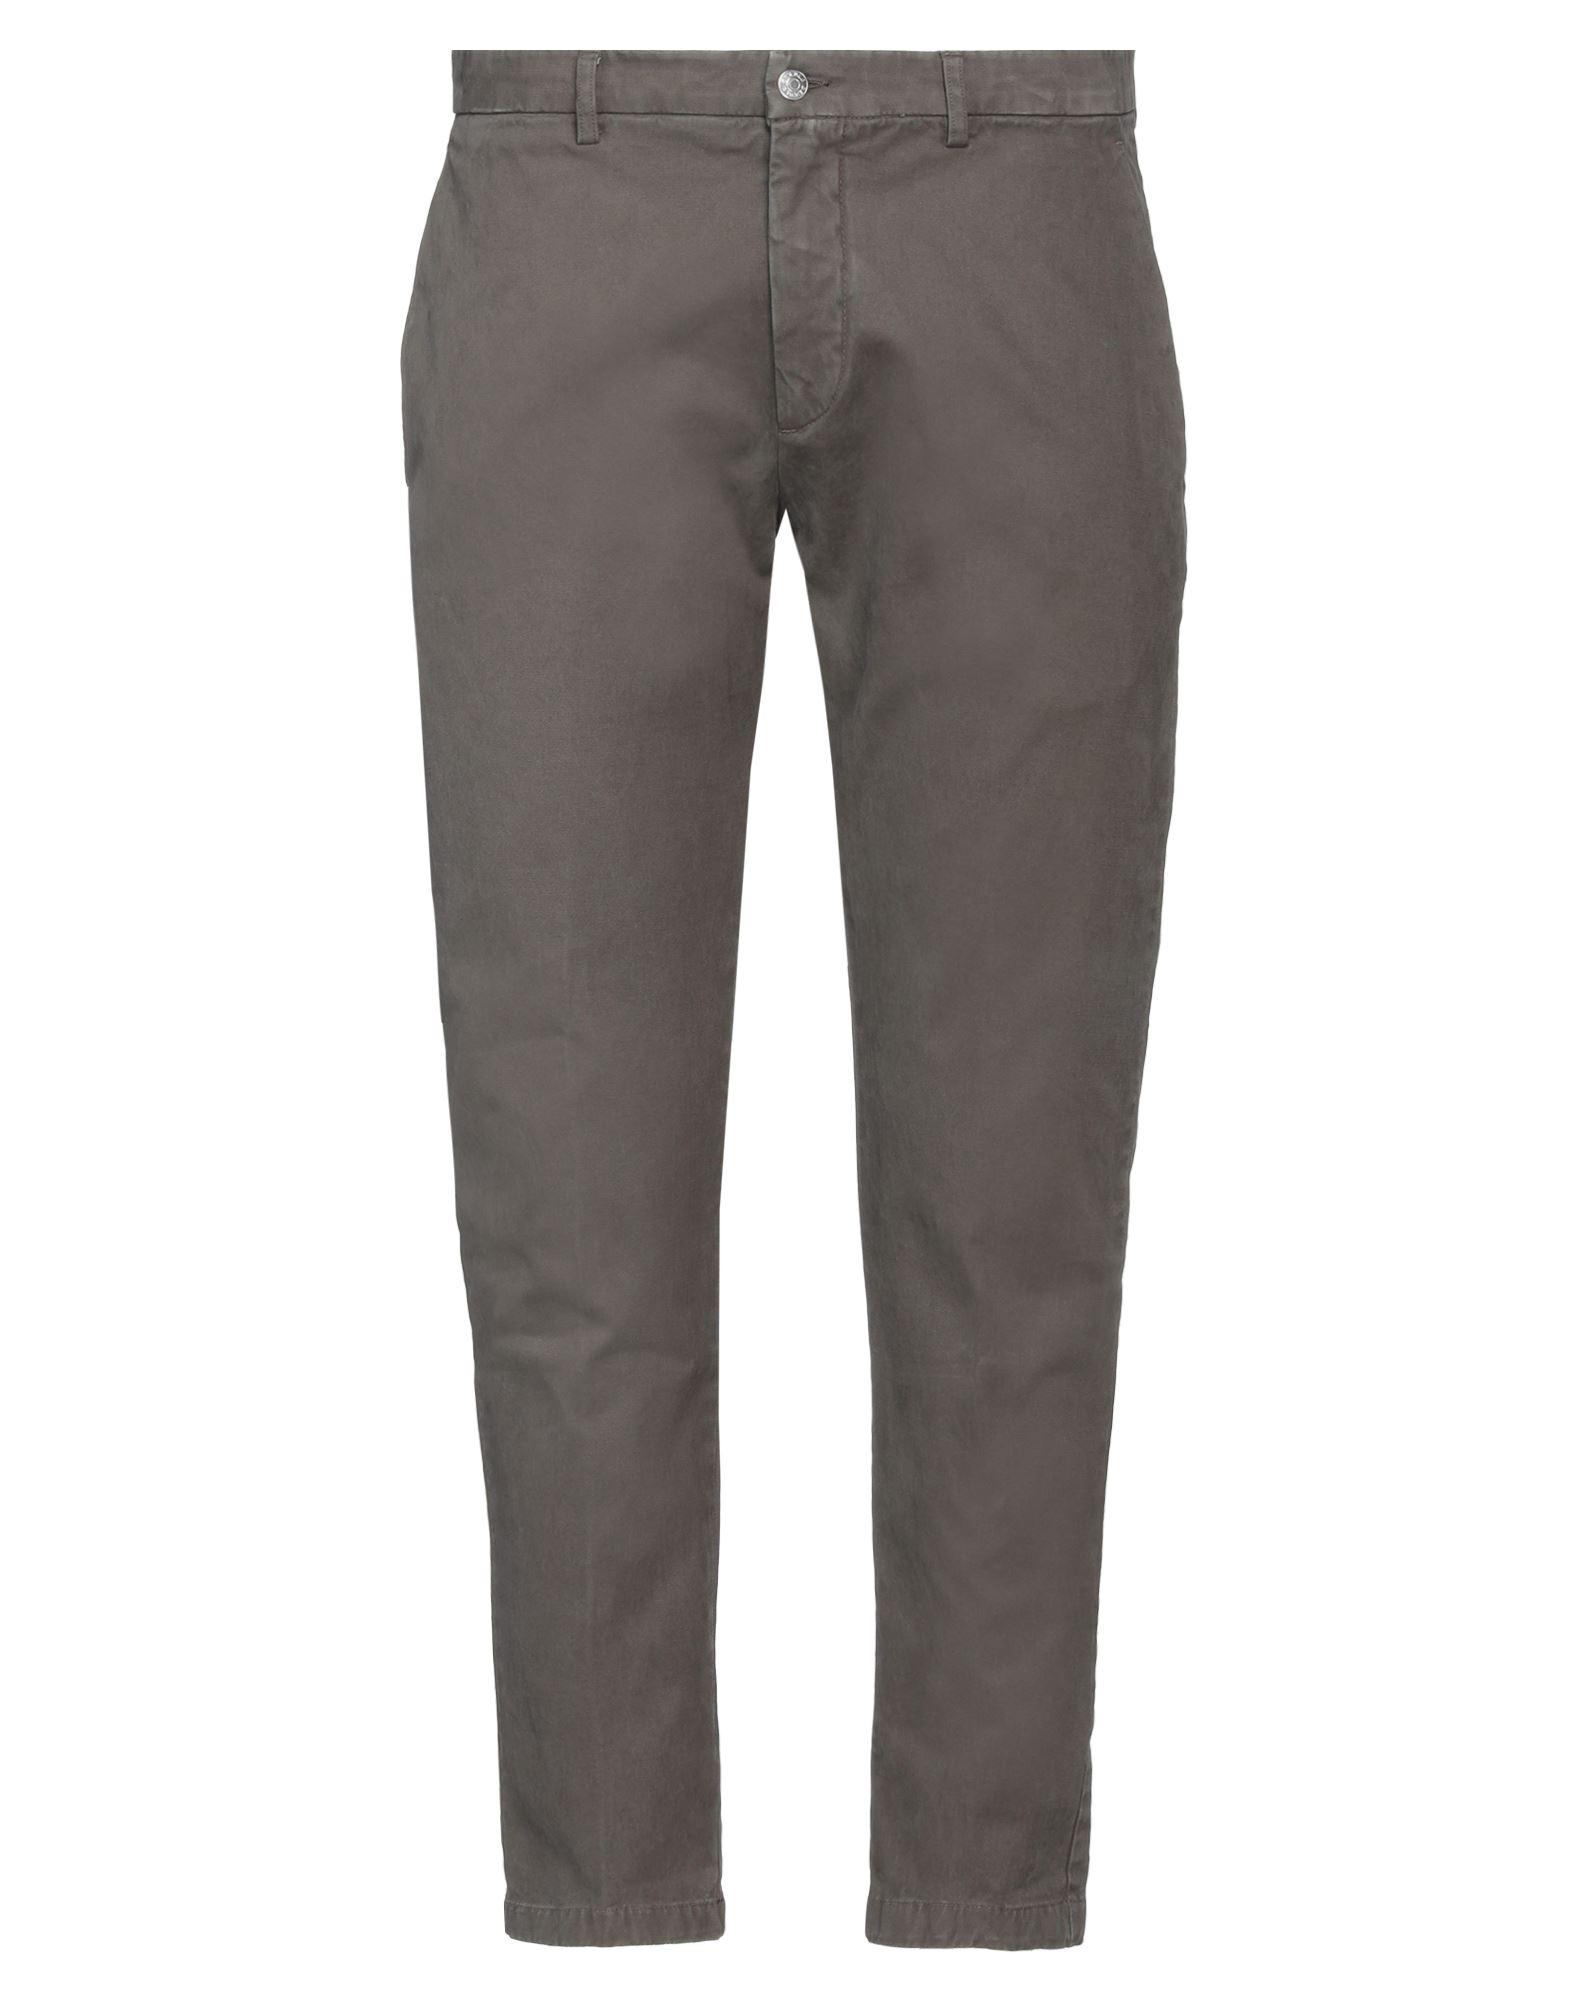 Be Able Man Pants Lead Size 38 Cotton, Elastane In Grey